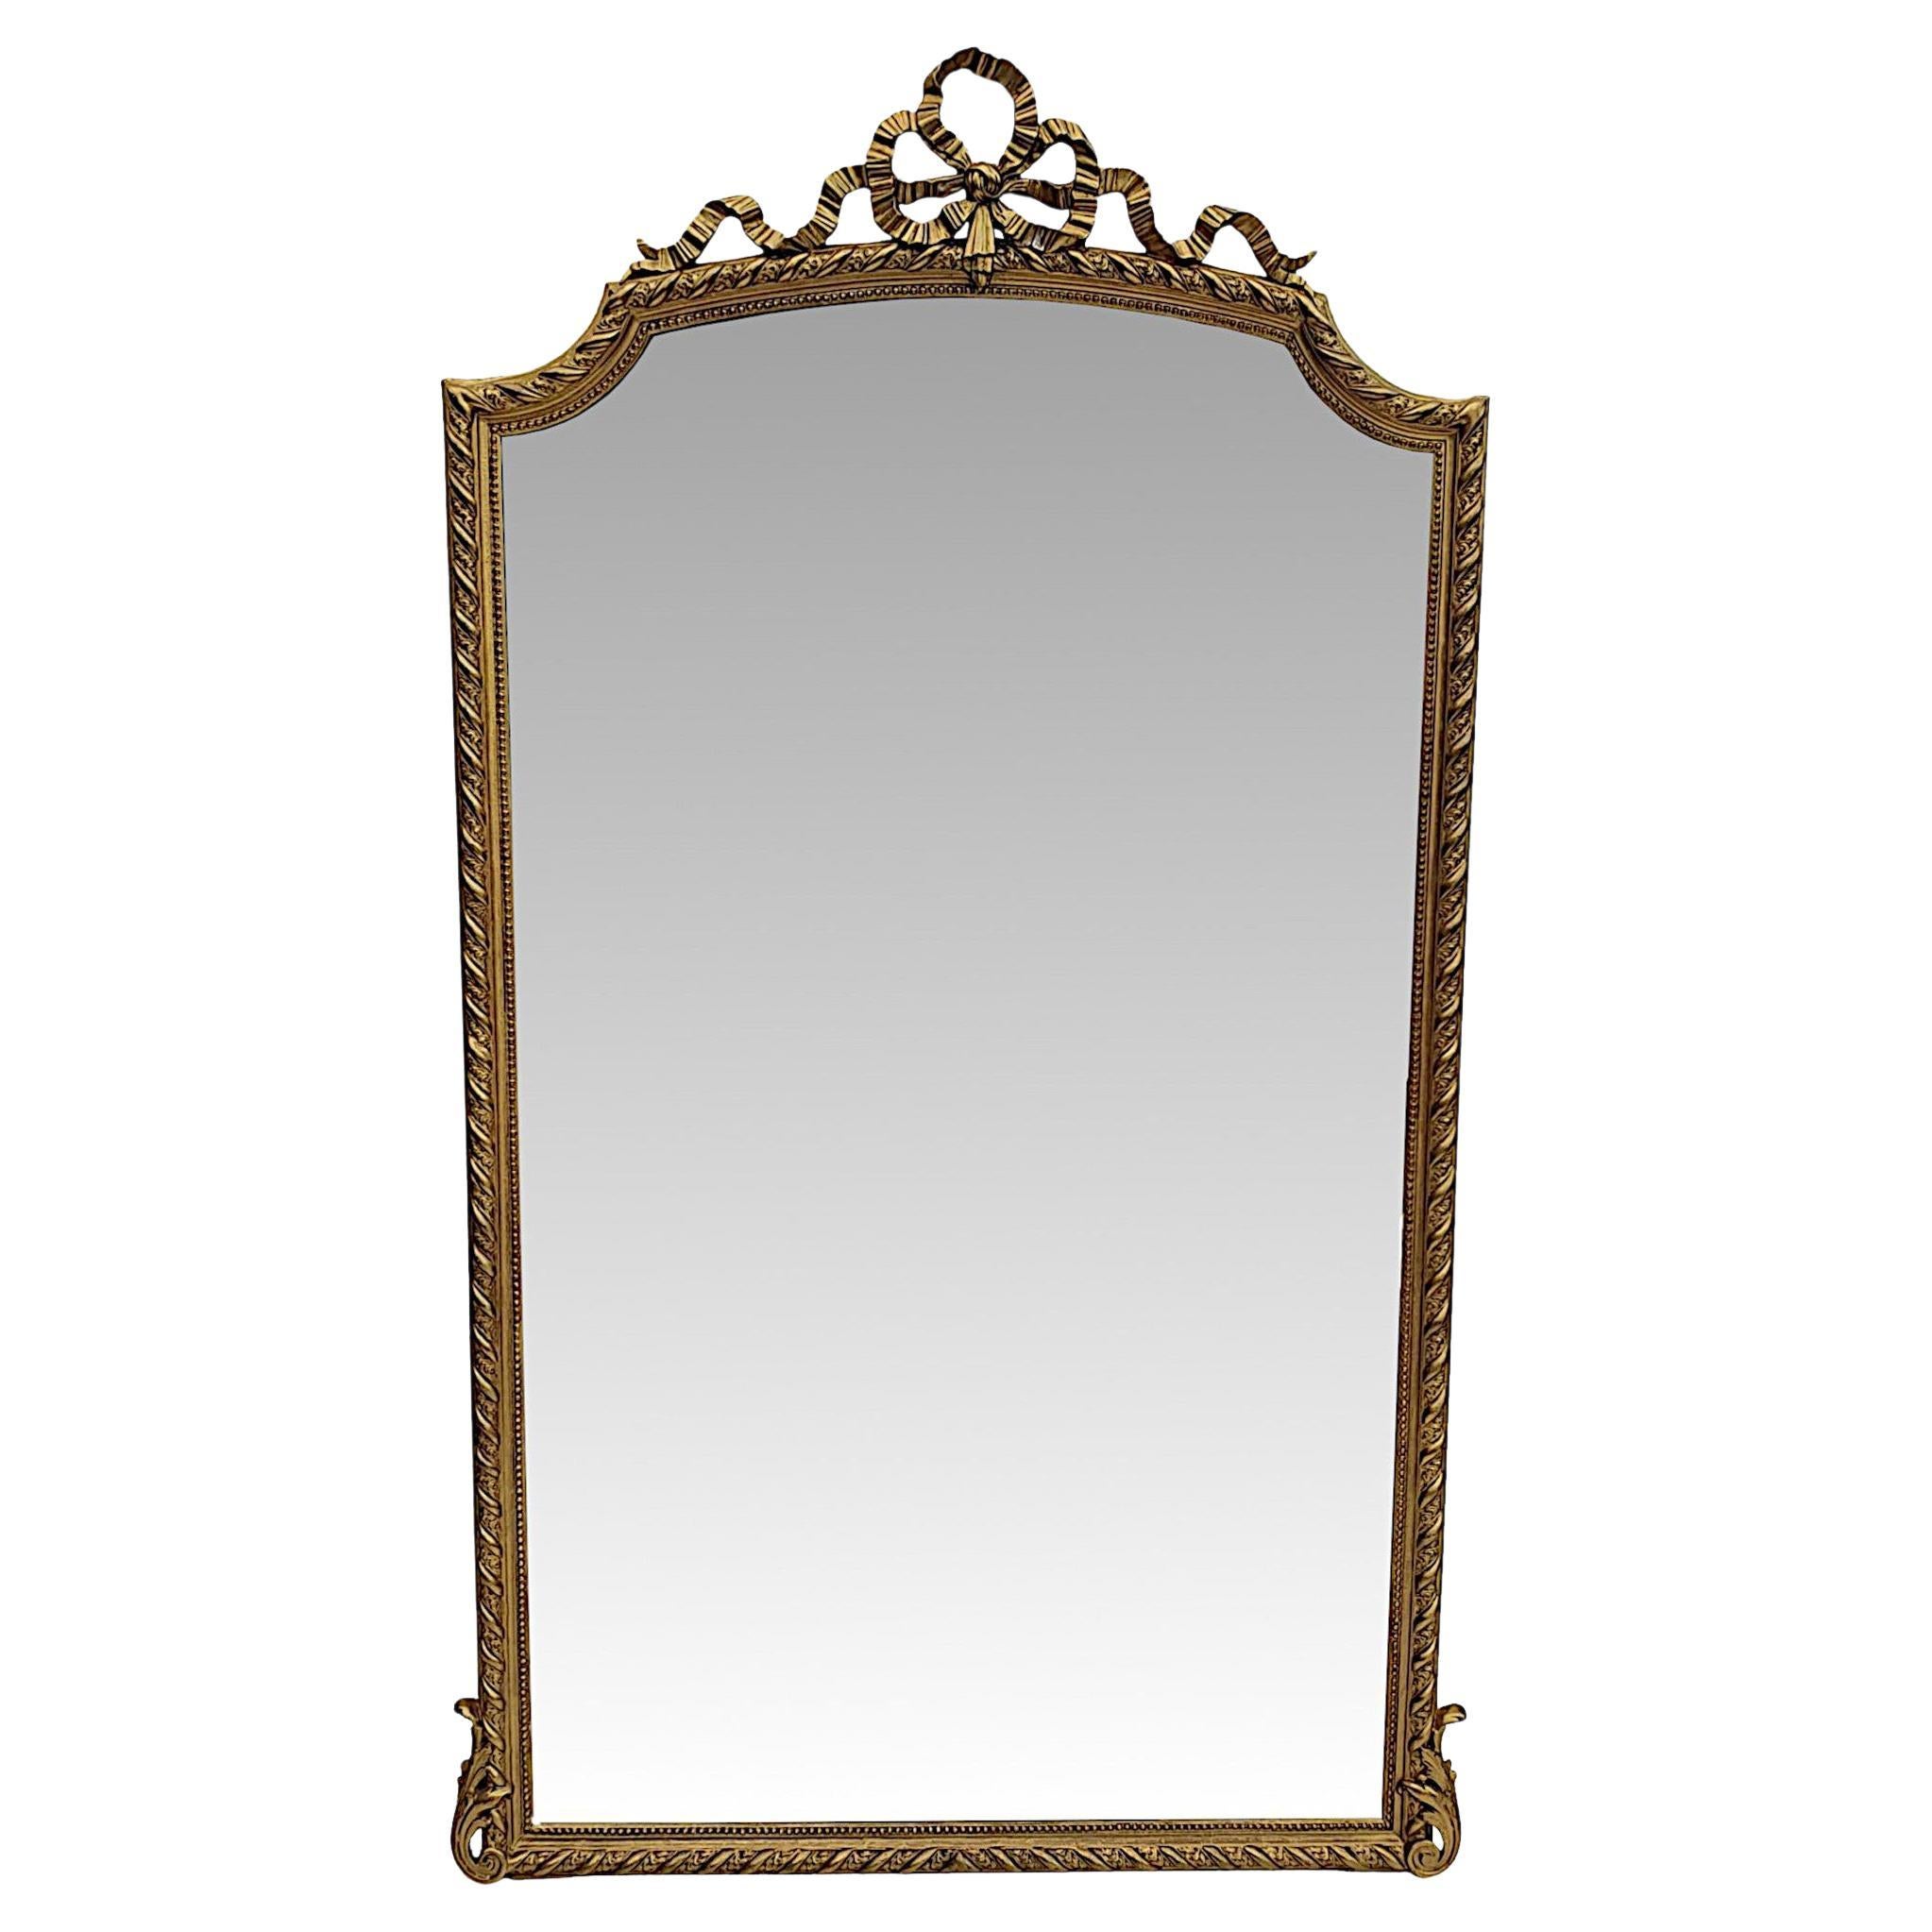 Very Fine 19th Century Giltwood Leaner or Hall or Overmantle Mirror